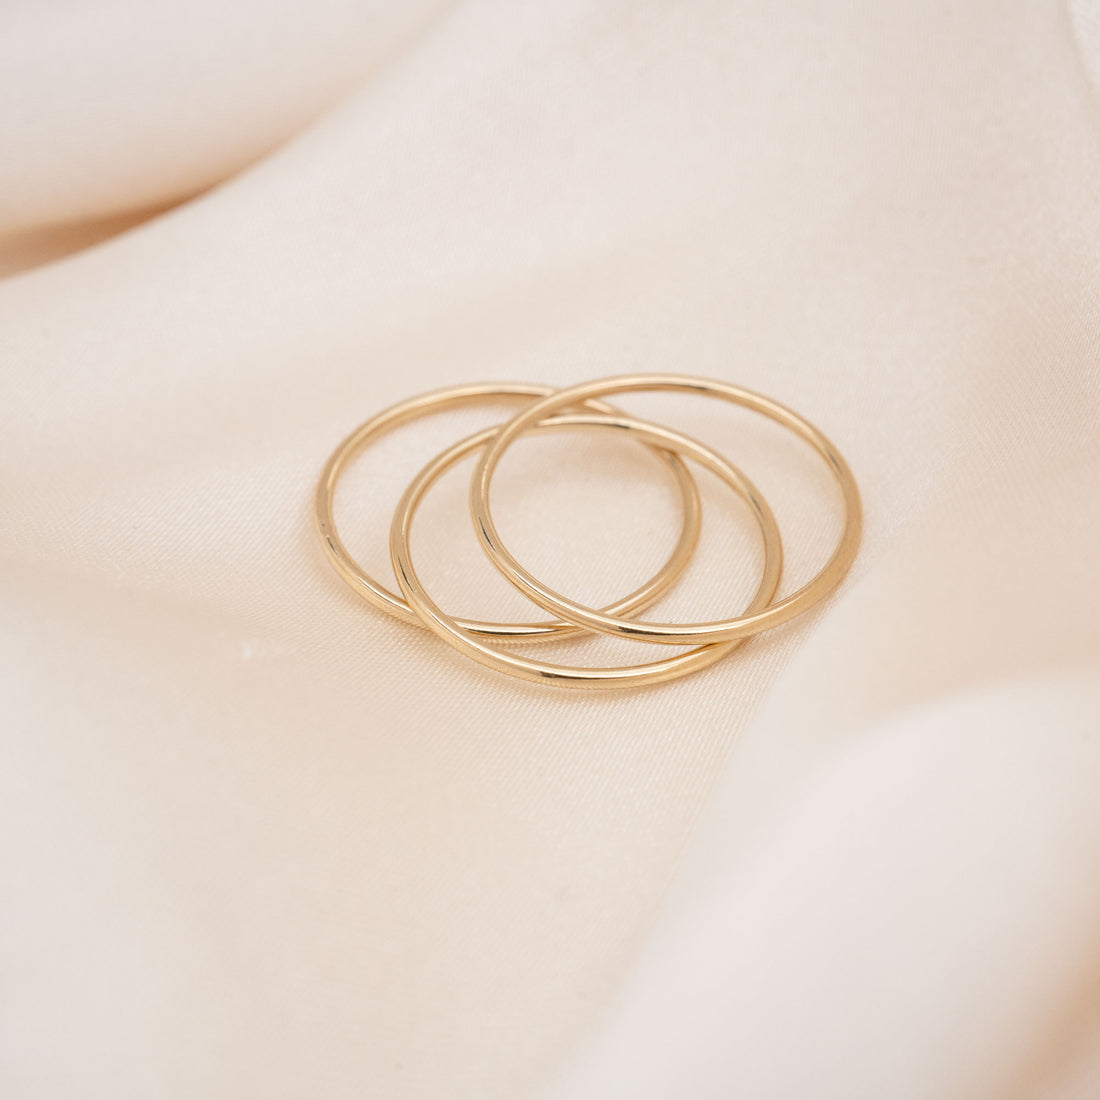 Gold Stackable Ring Set of 3